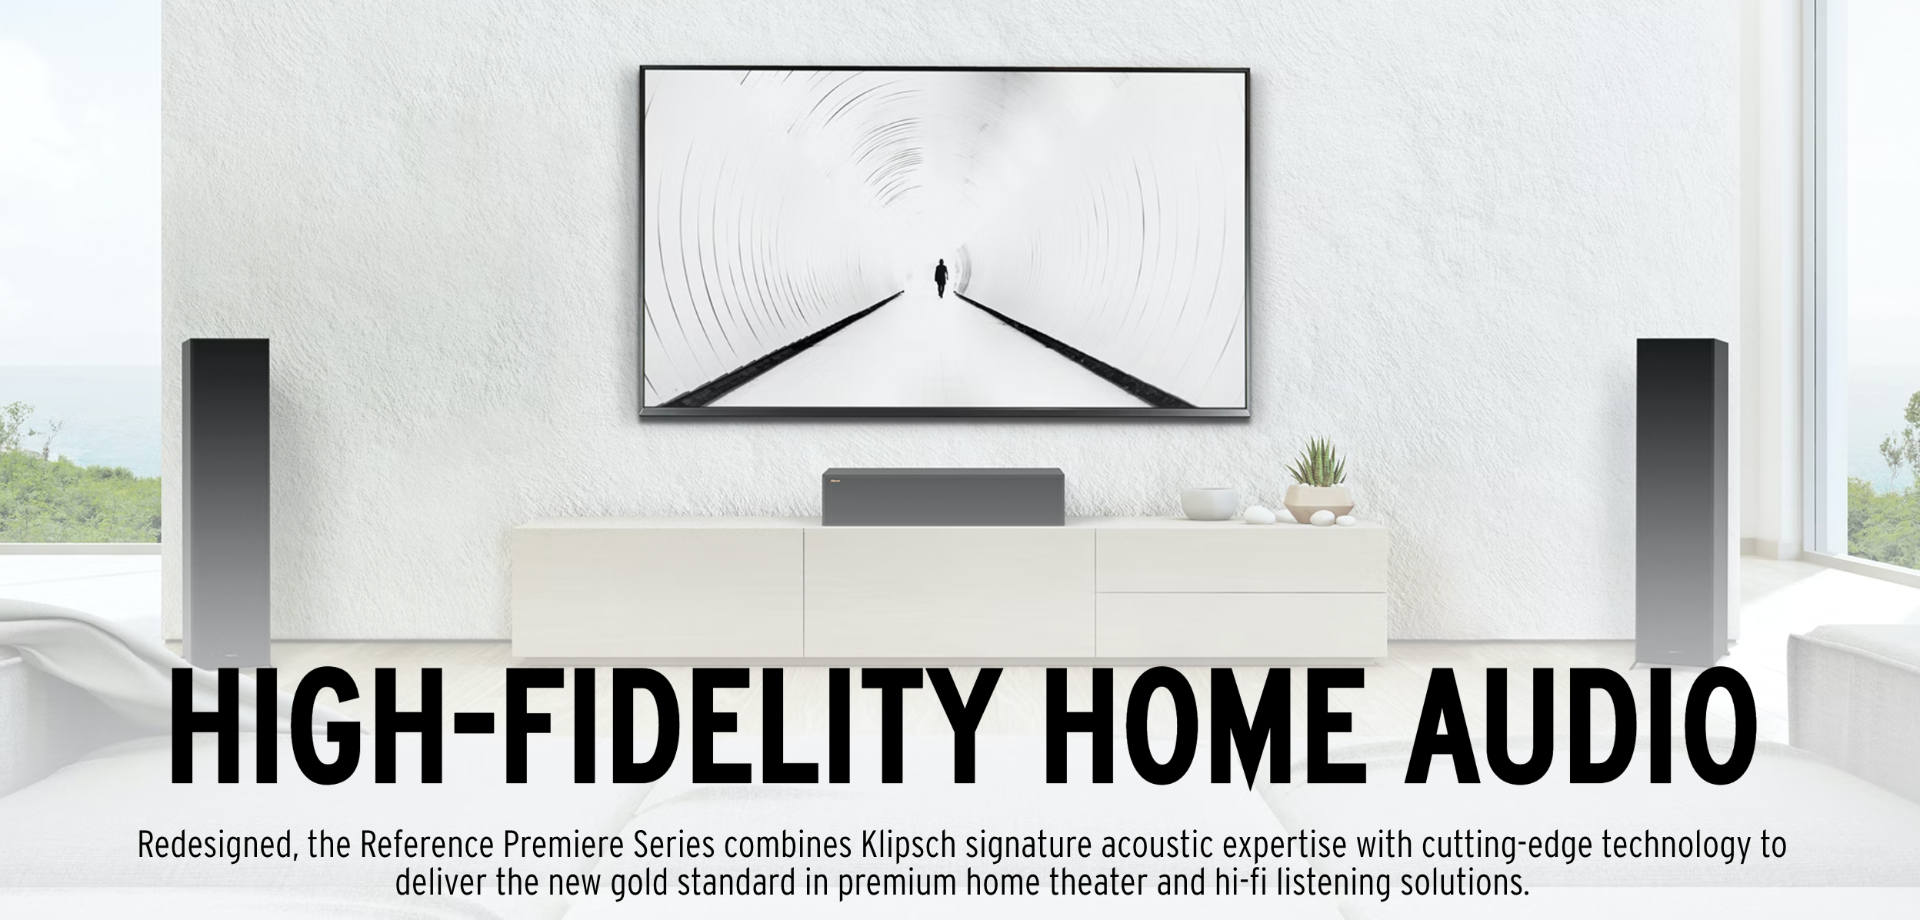 Redesigned, the Reference Premiere Series combines Klipsch signature acoustic expertise with cutting-edge technology to deliver the new gold standard in premium home theater and hi-fi listening solutions. 